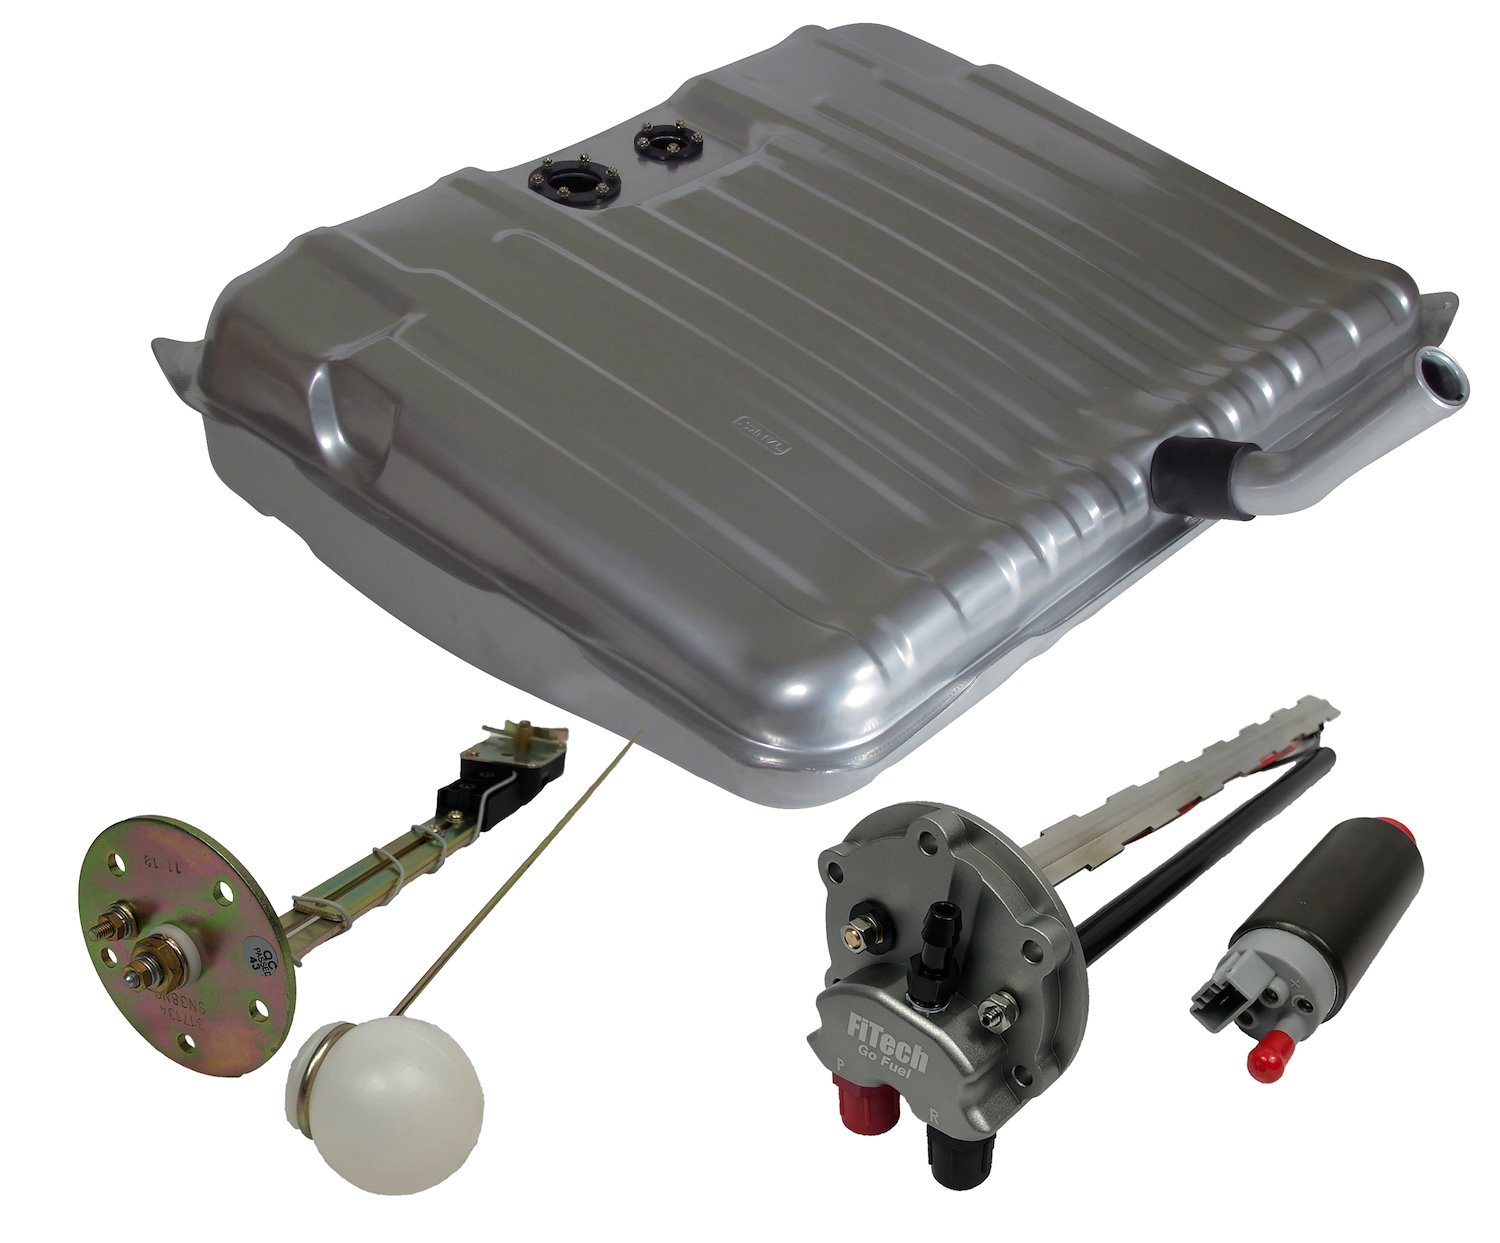 Fuel Tank Kit for Pontiac GTO, Lemans, and